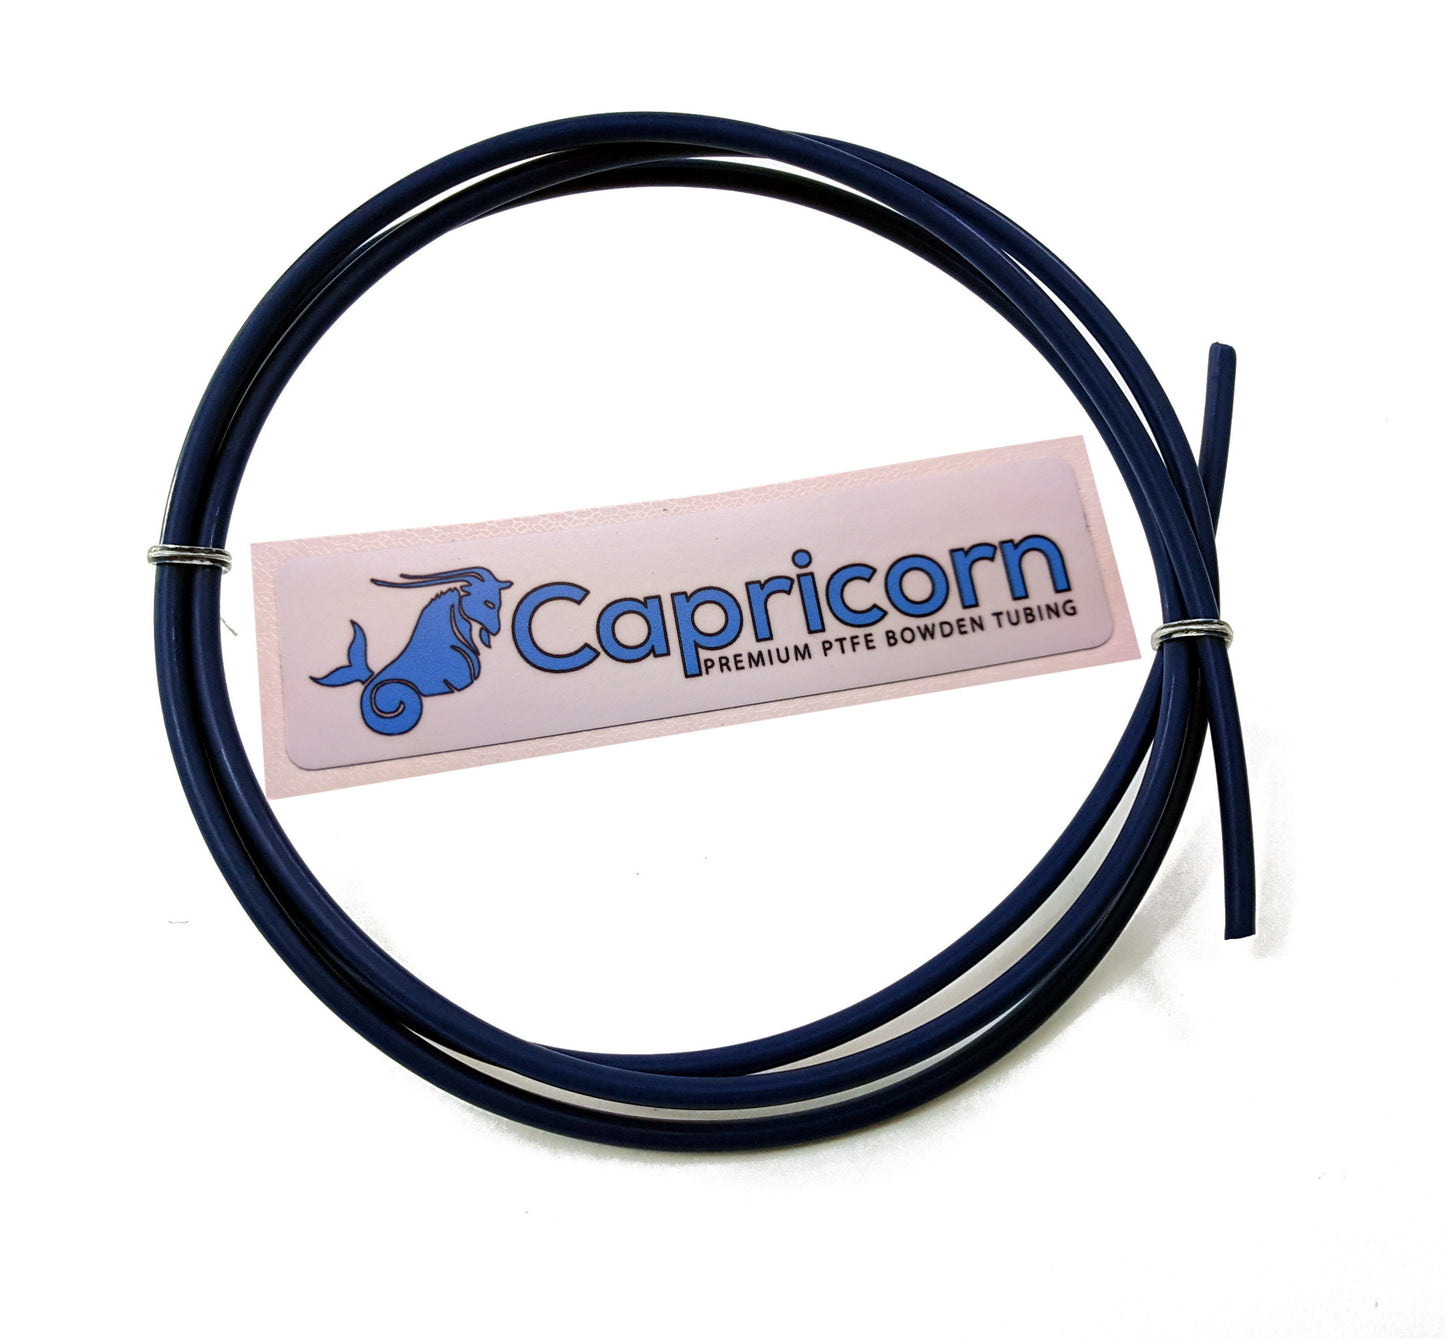 Capricorn XS Reduced Friction Bowden Tubing 2.85mm